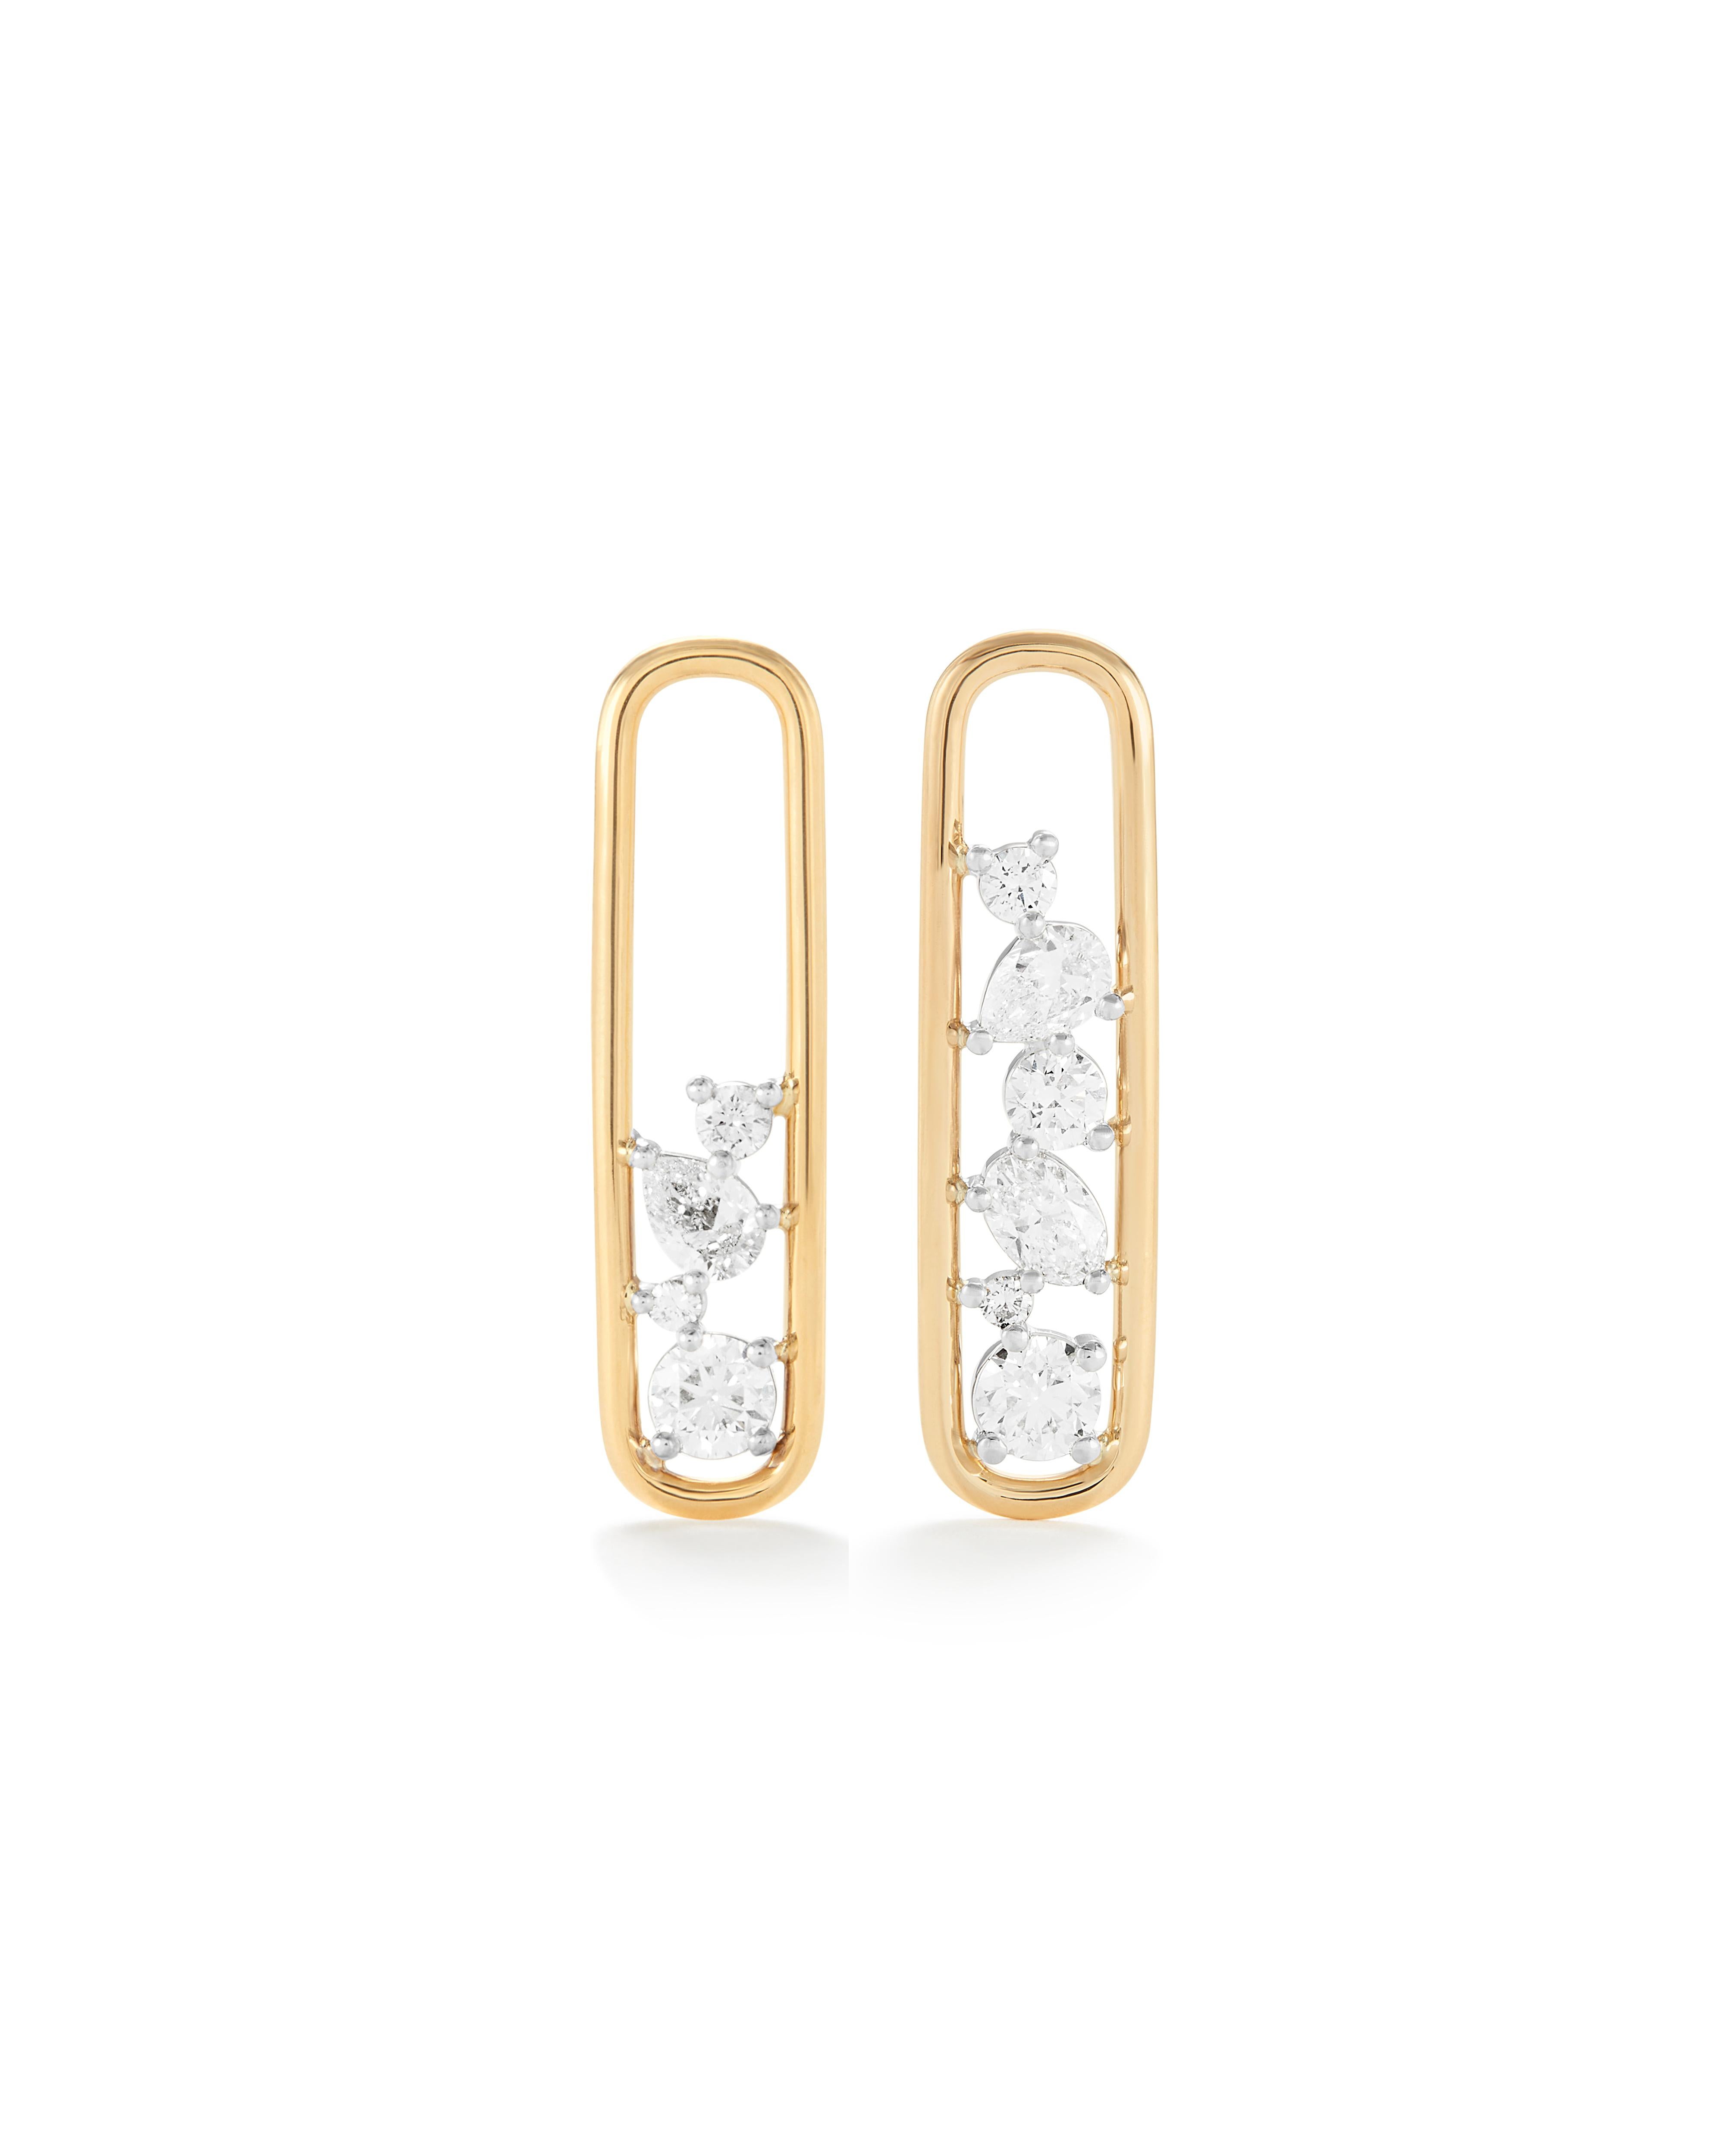 Dreamy drop earrings that will elevate any outfit! They are meticulously handcrafted in 18K solid gold with varying sized round, pear and oval shaped natural diamonds set in platinum. 

The Mara Collection was built around the beauty of negative